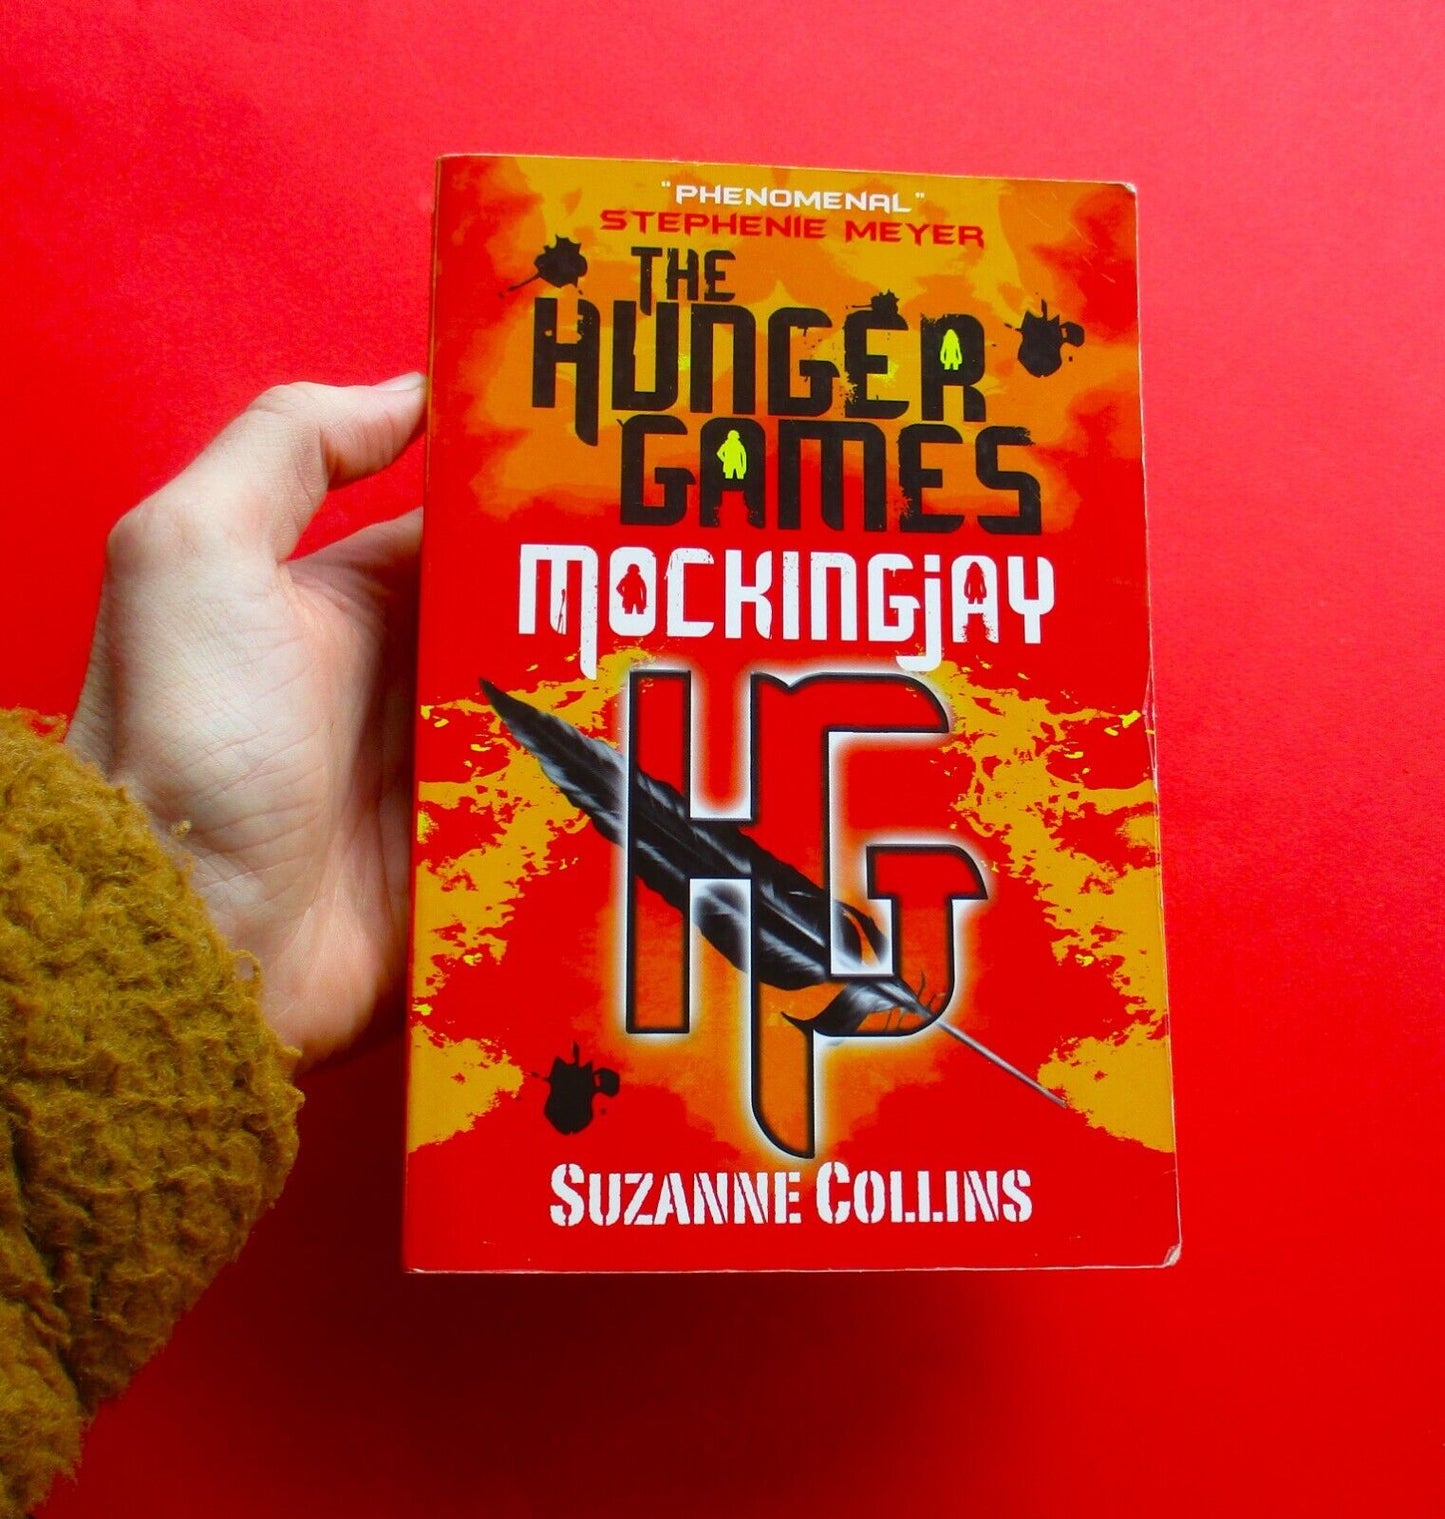 Mockingjay by Suzanne Collins The Hunger Games Book 3 Paperback